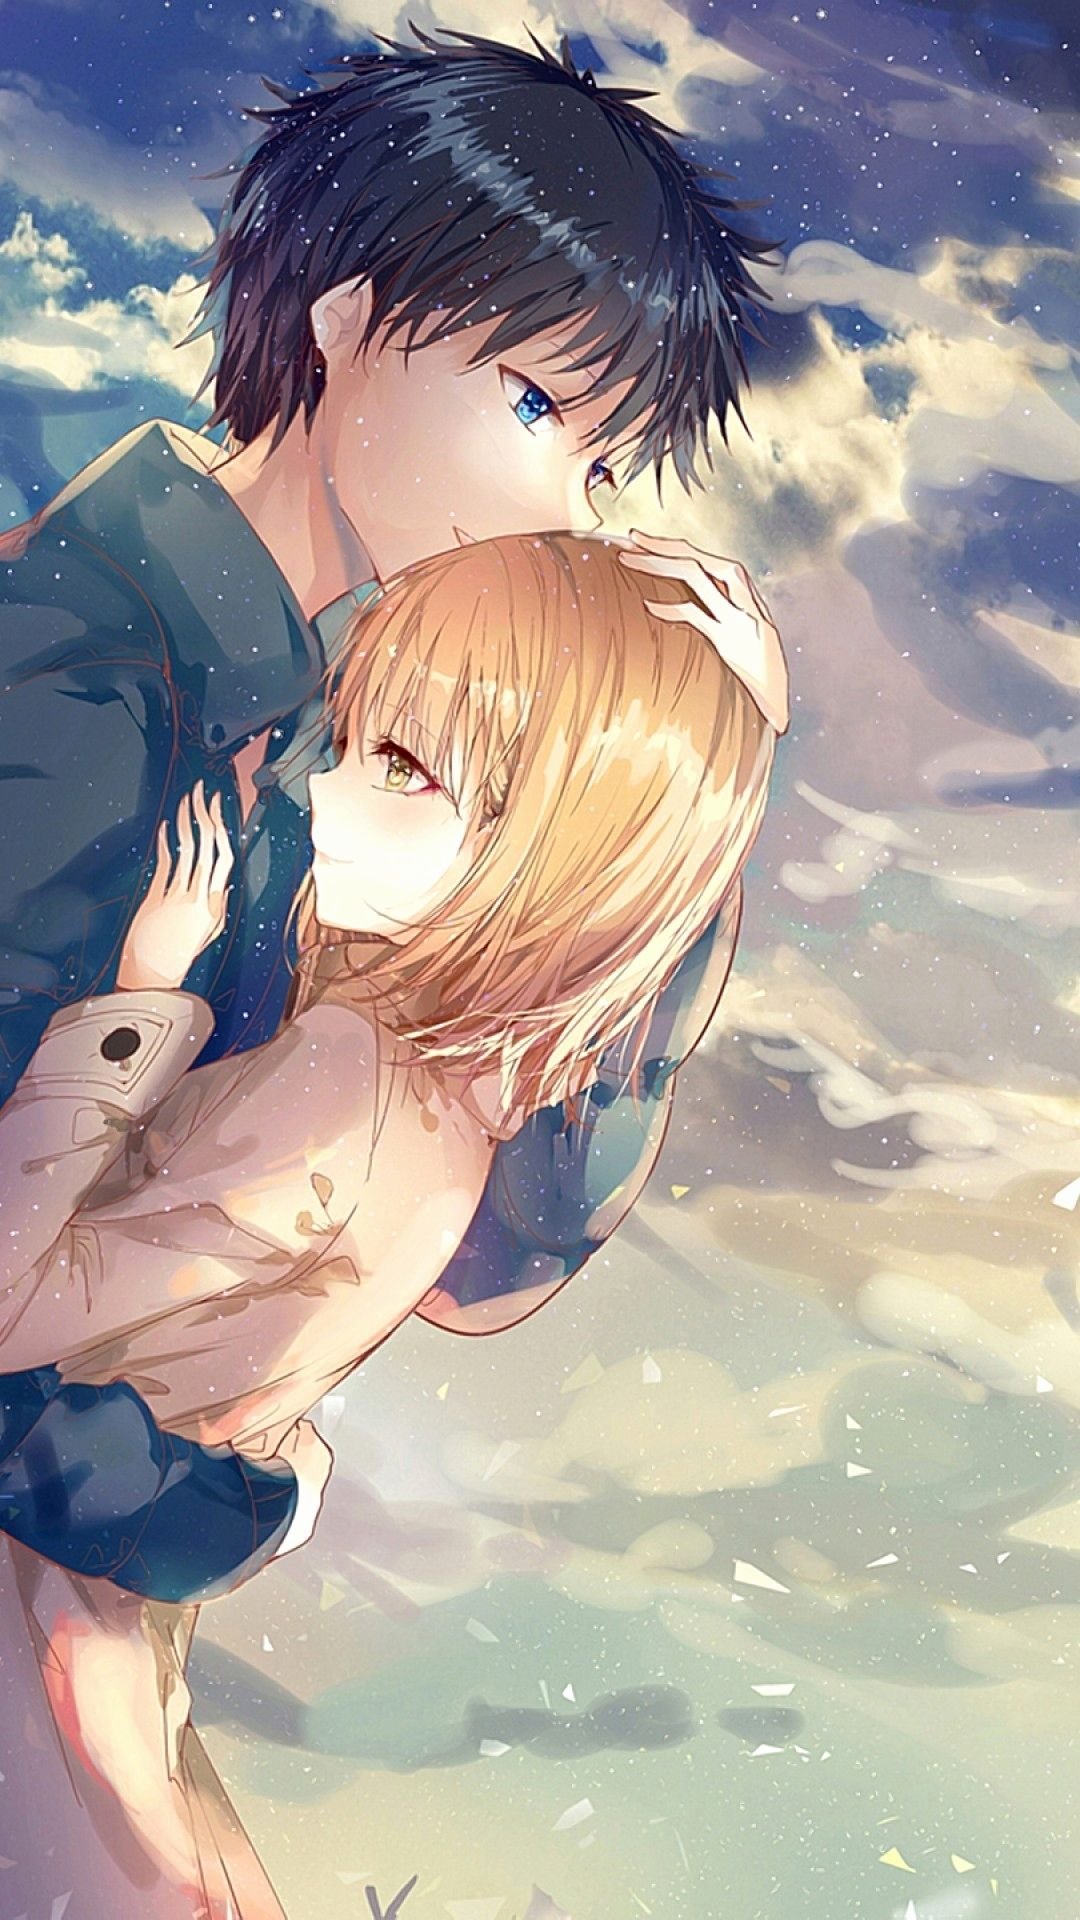 Anime Couple Wallpapers  Top 35 Best Anime Couple Wallpapers Download